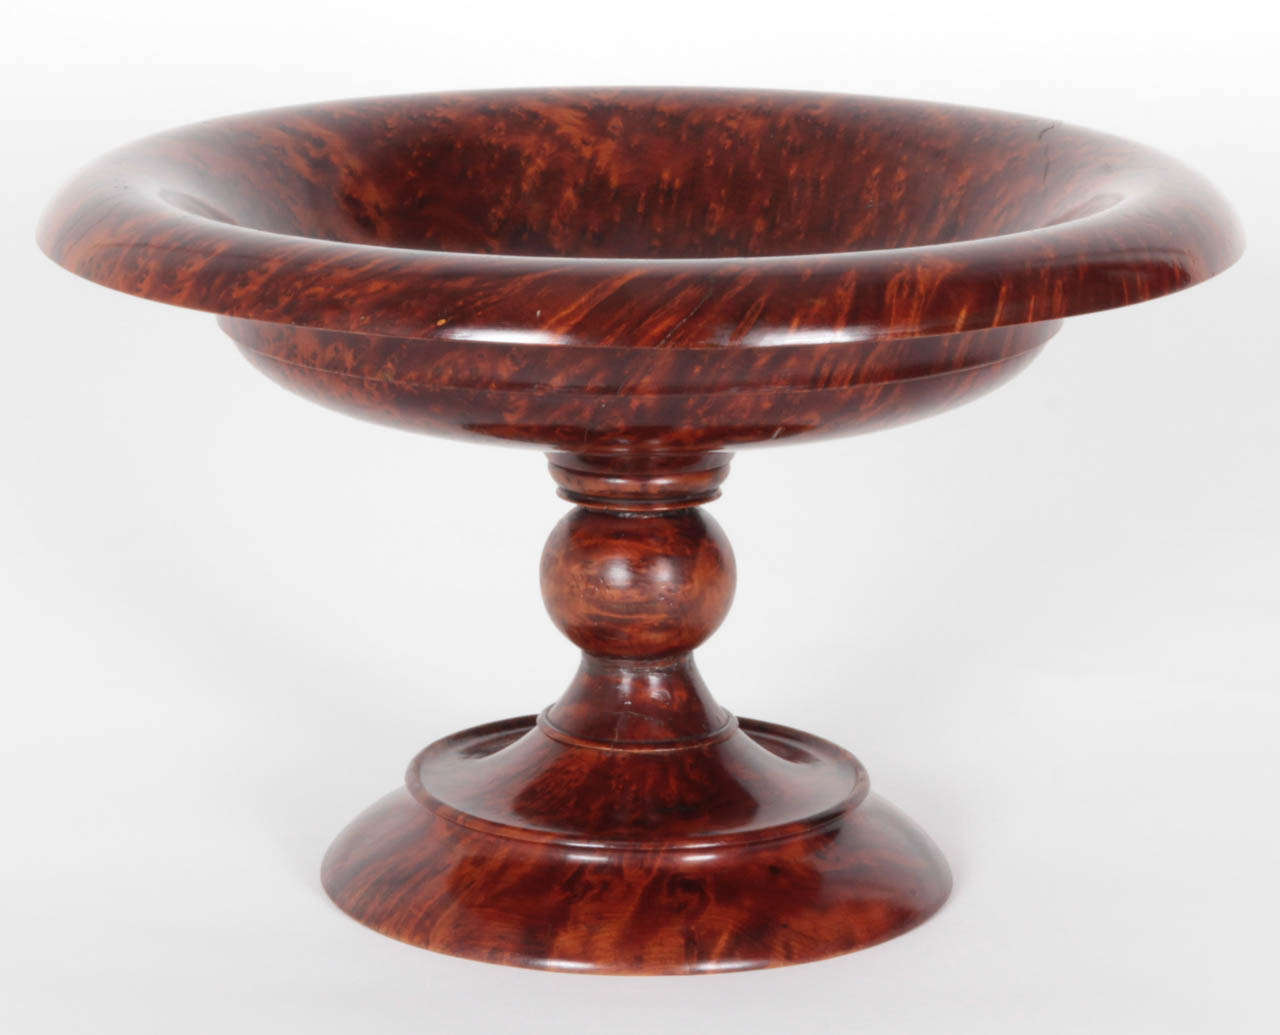 A French thuya wood tazza, Circa 1930s, of classic form. Stamped on the base